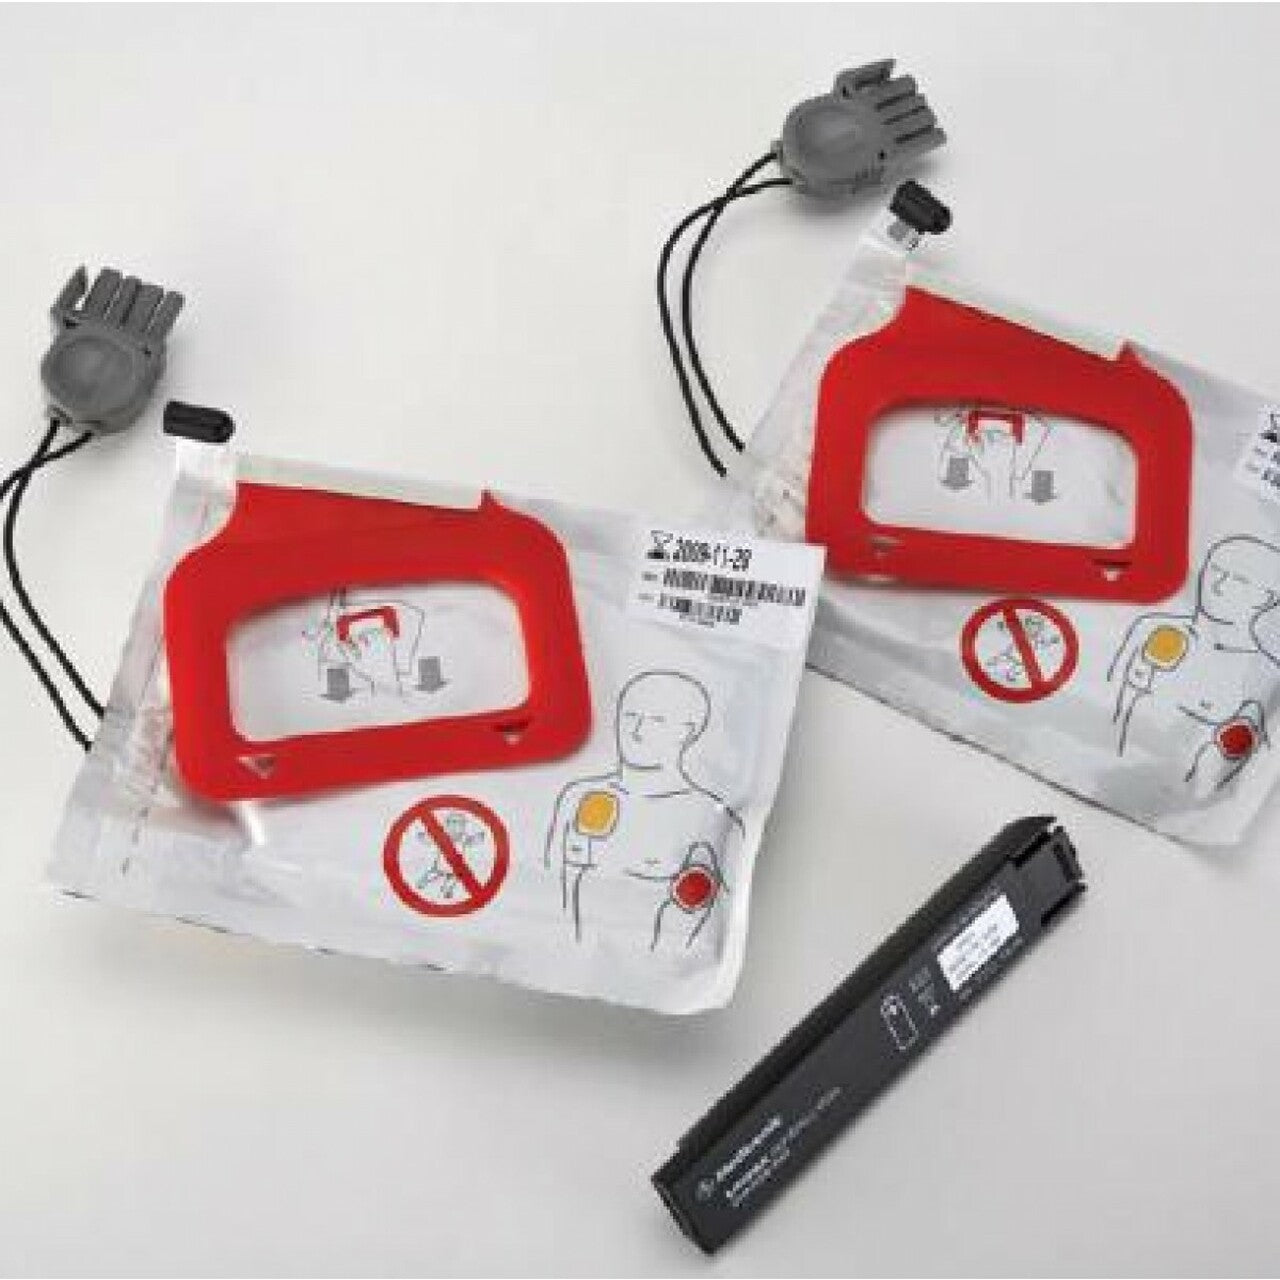 Physio Control LIFEPAK CR PLUS - CHARGE-PAK battery charger stick and 2 sets of electrode pads